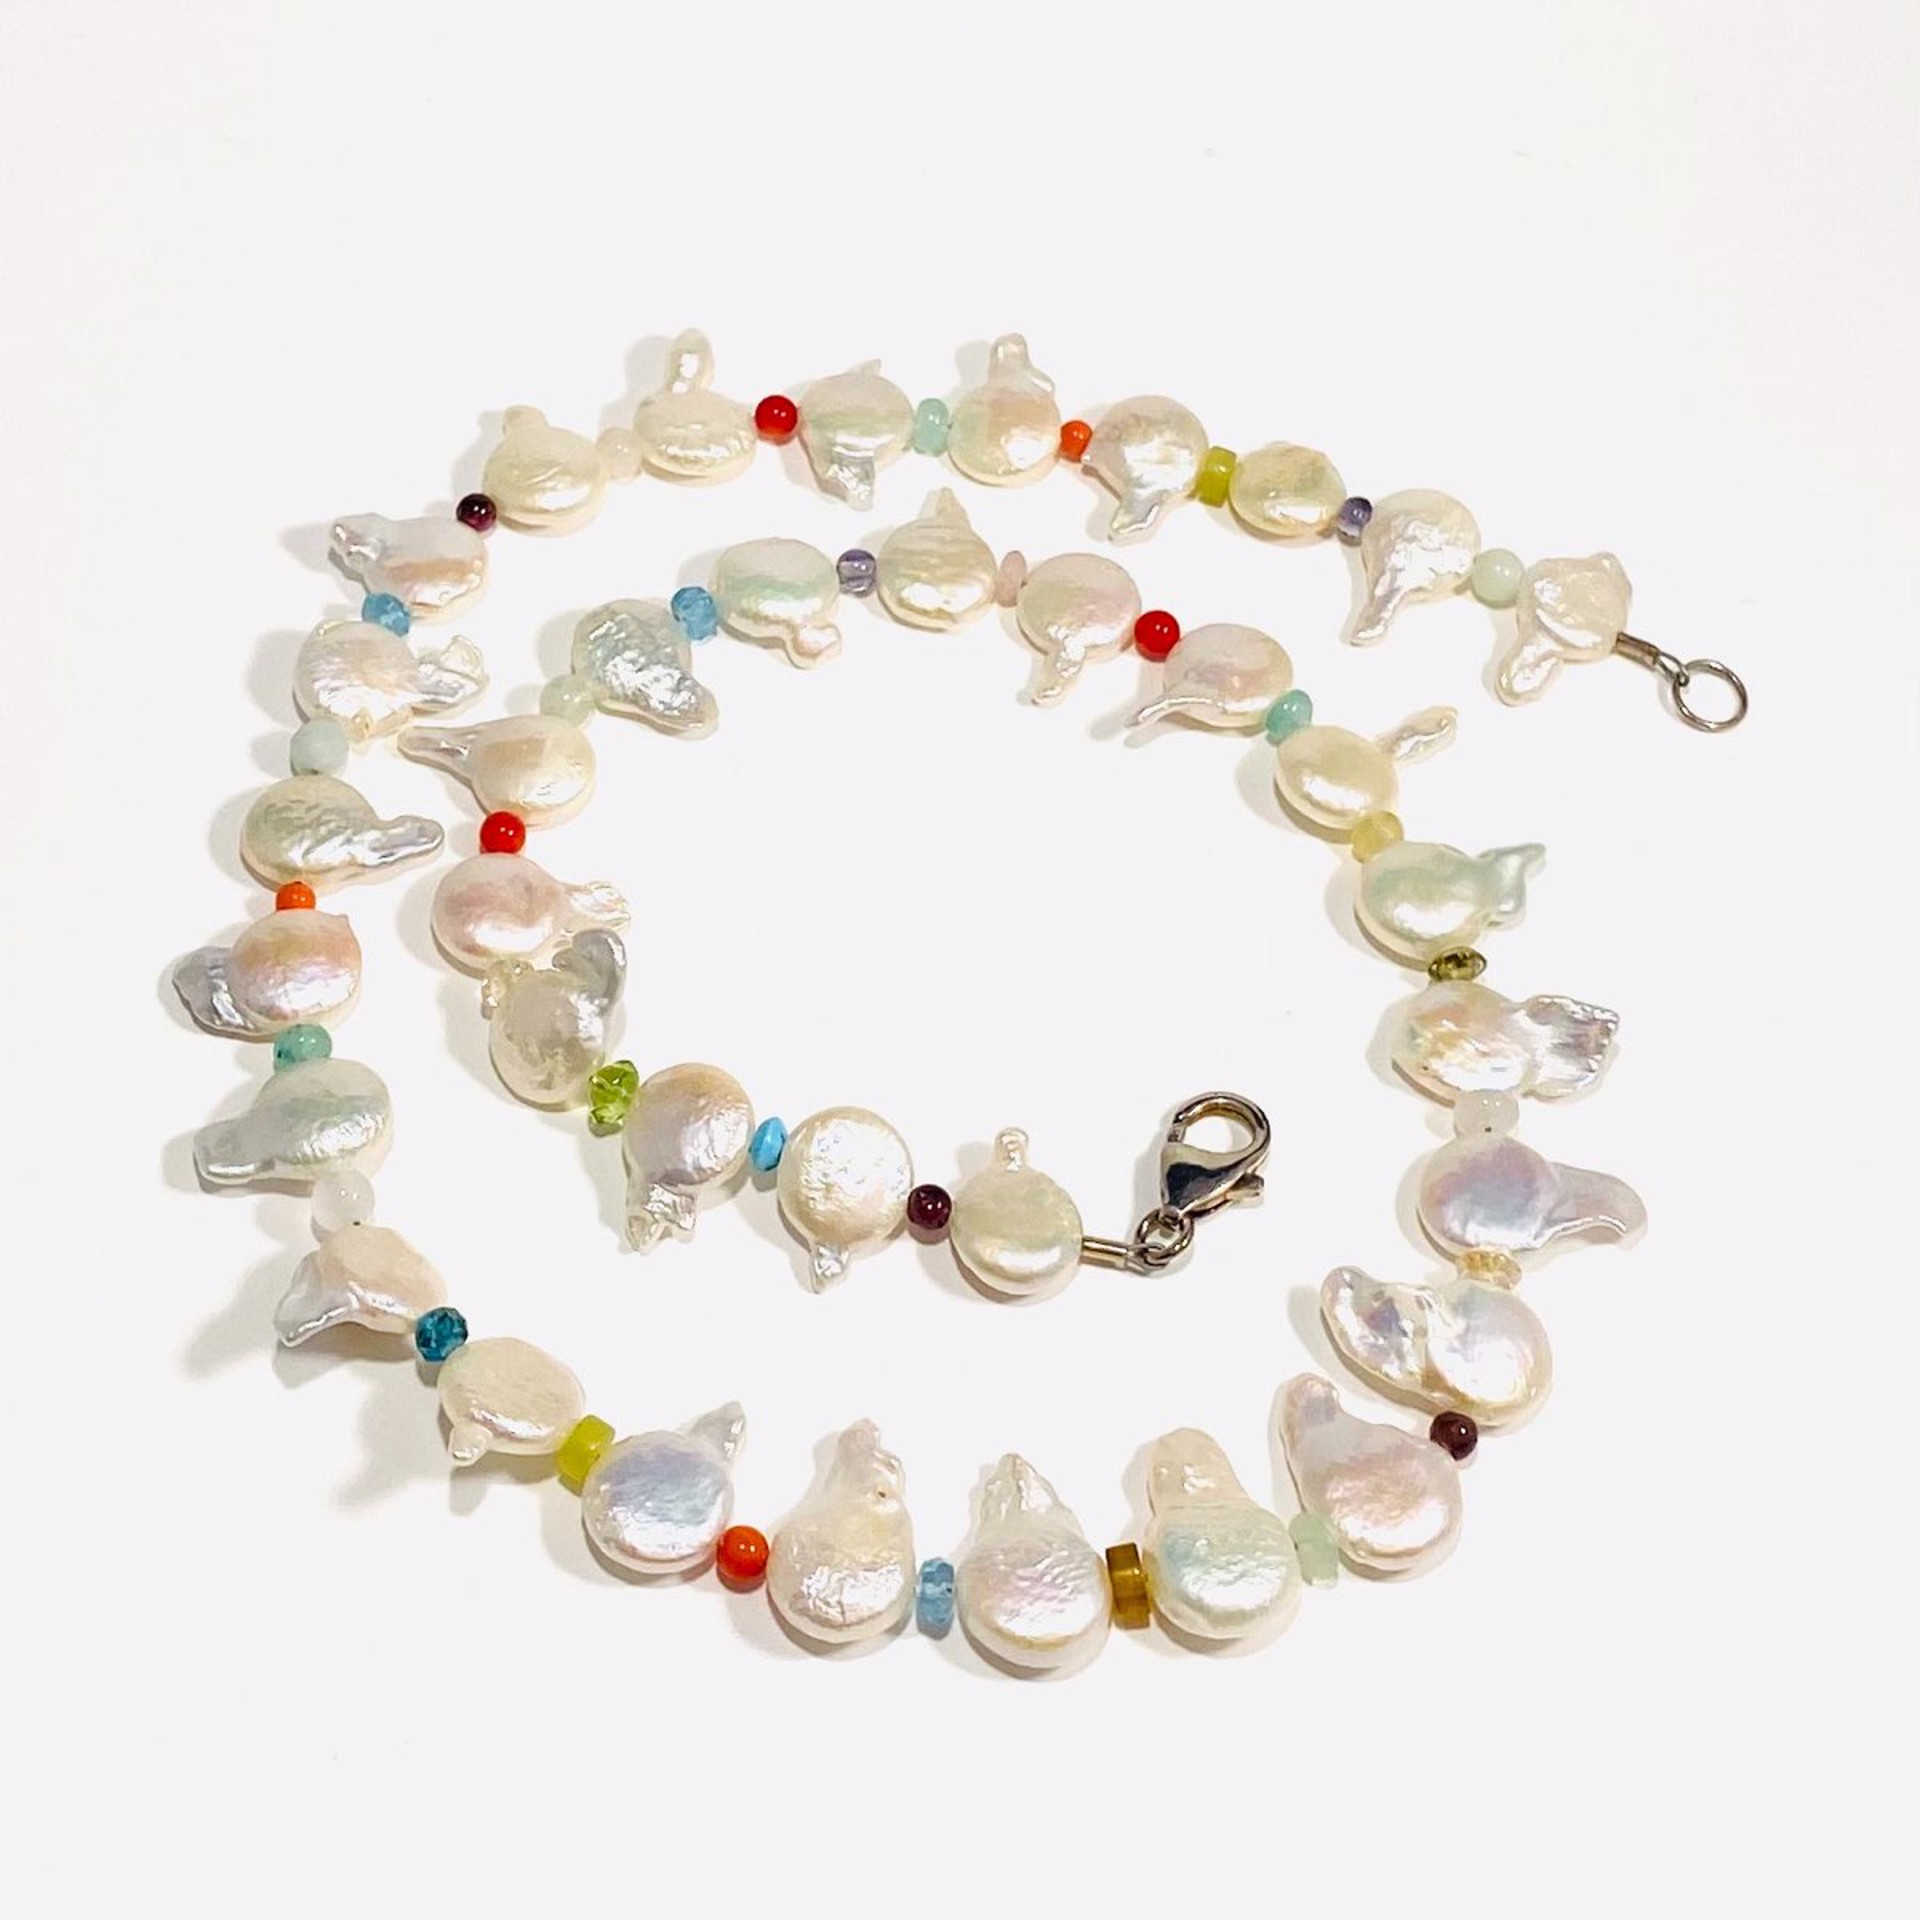 NT22-138 Coin Pearl Multicolor Gemstone Necklace by Nance Trueworthy